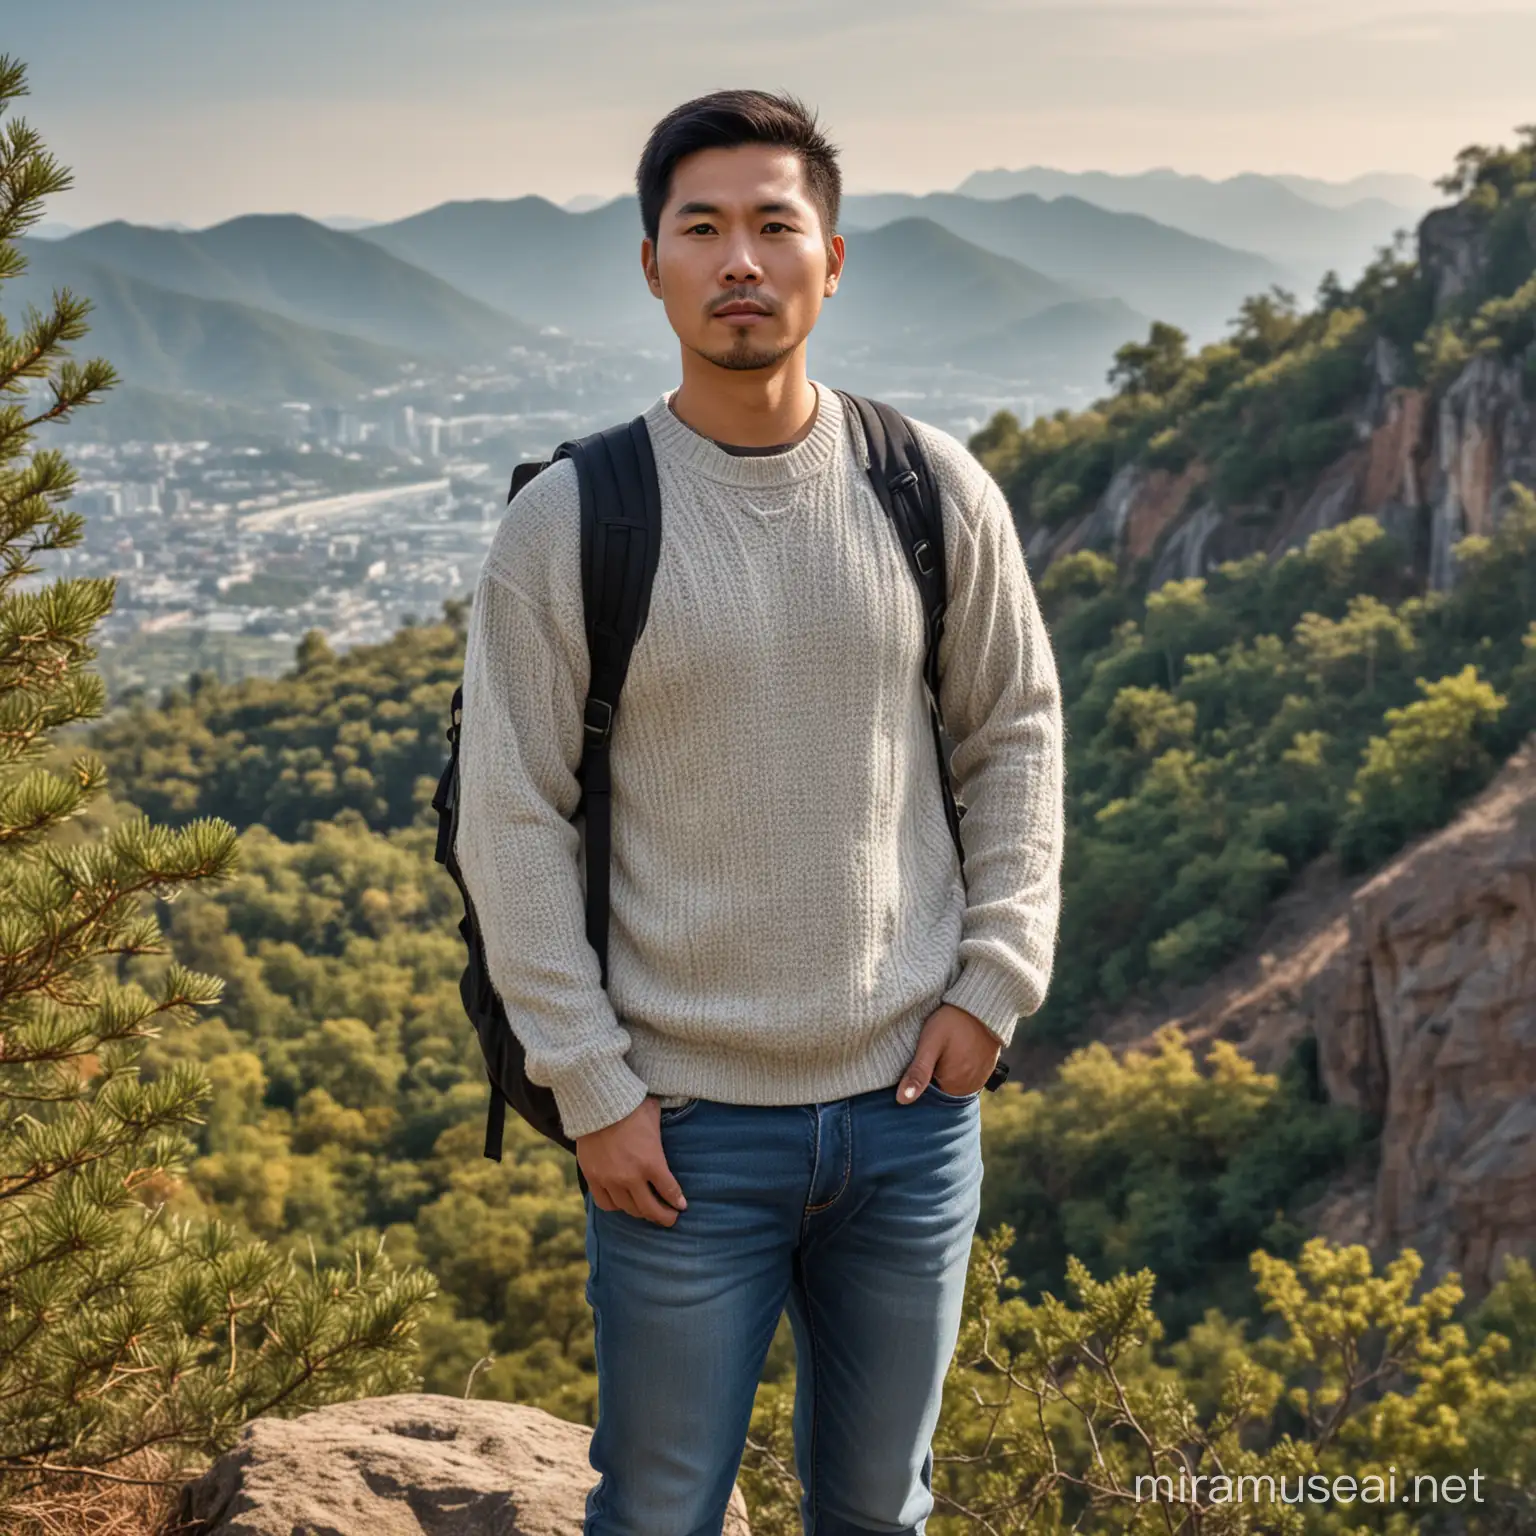 Realistic photography A 33 year old Asian man, standing on a mountain hill, (curvy body) big breasts, wearing a sweater, jeans, backpack, high cliff, many trees, posing, looking at the viewer, HDR.